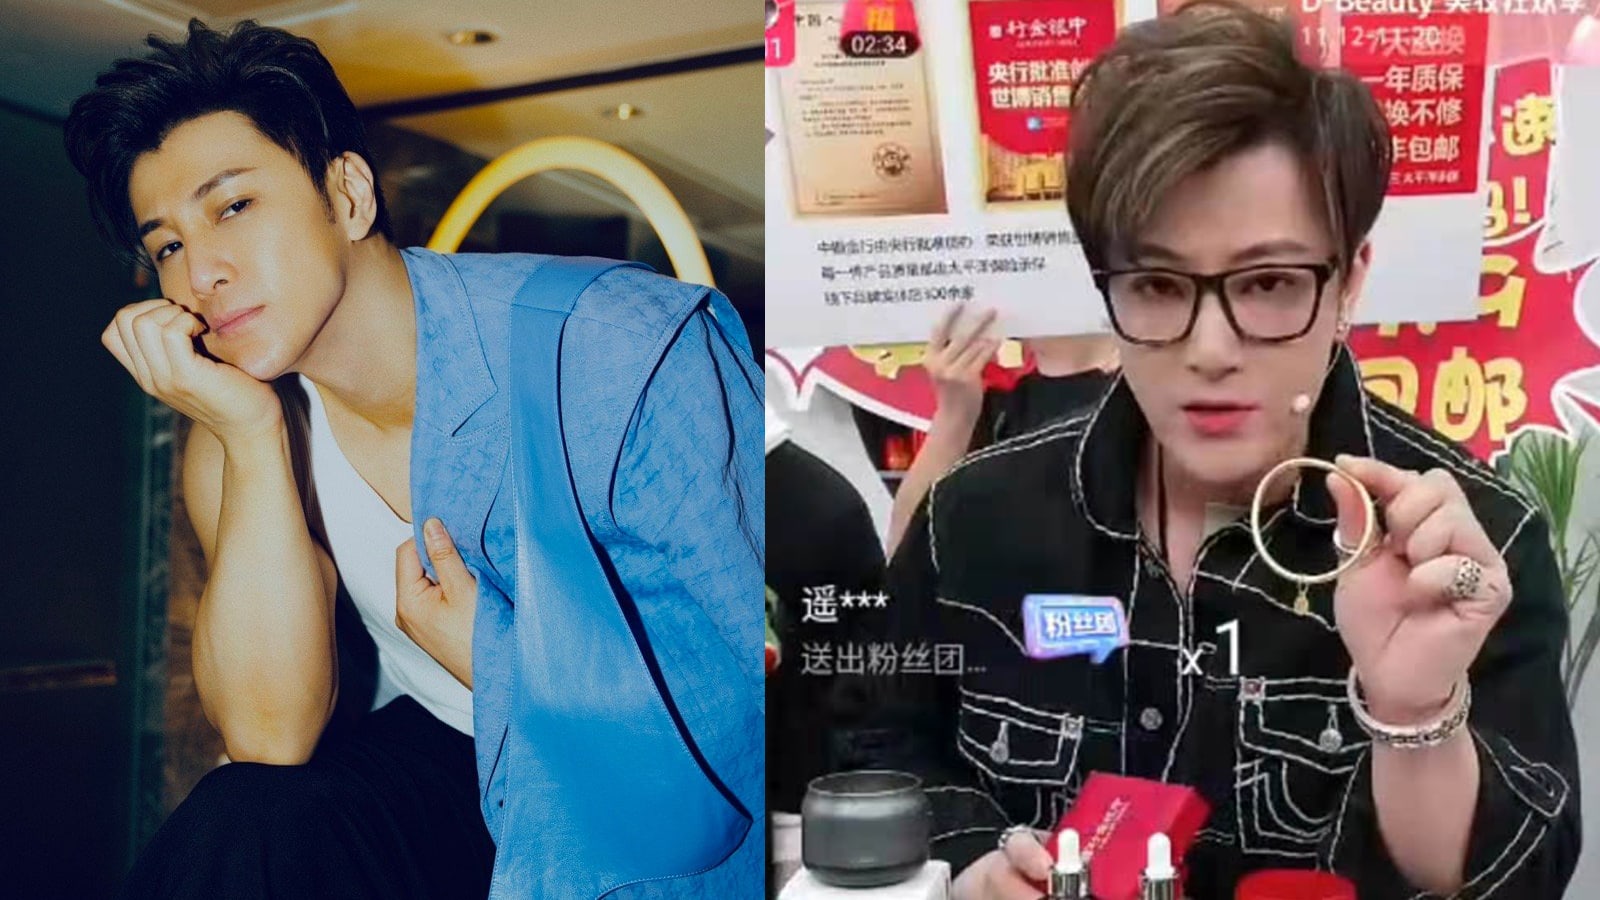 HK Singer Ambrose Hui Forks Out S$279K To Make Up The Difference After Selling Gold Bracelets At Wrong Price On Live Stream